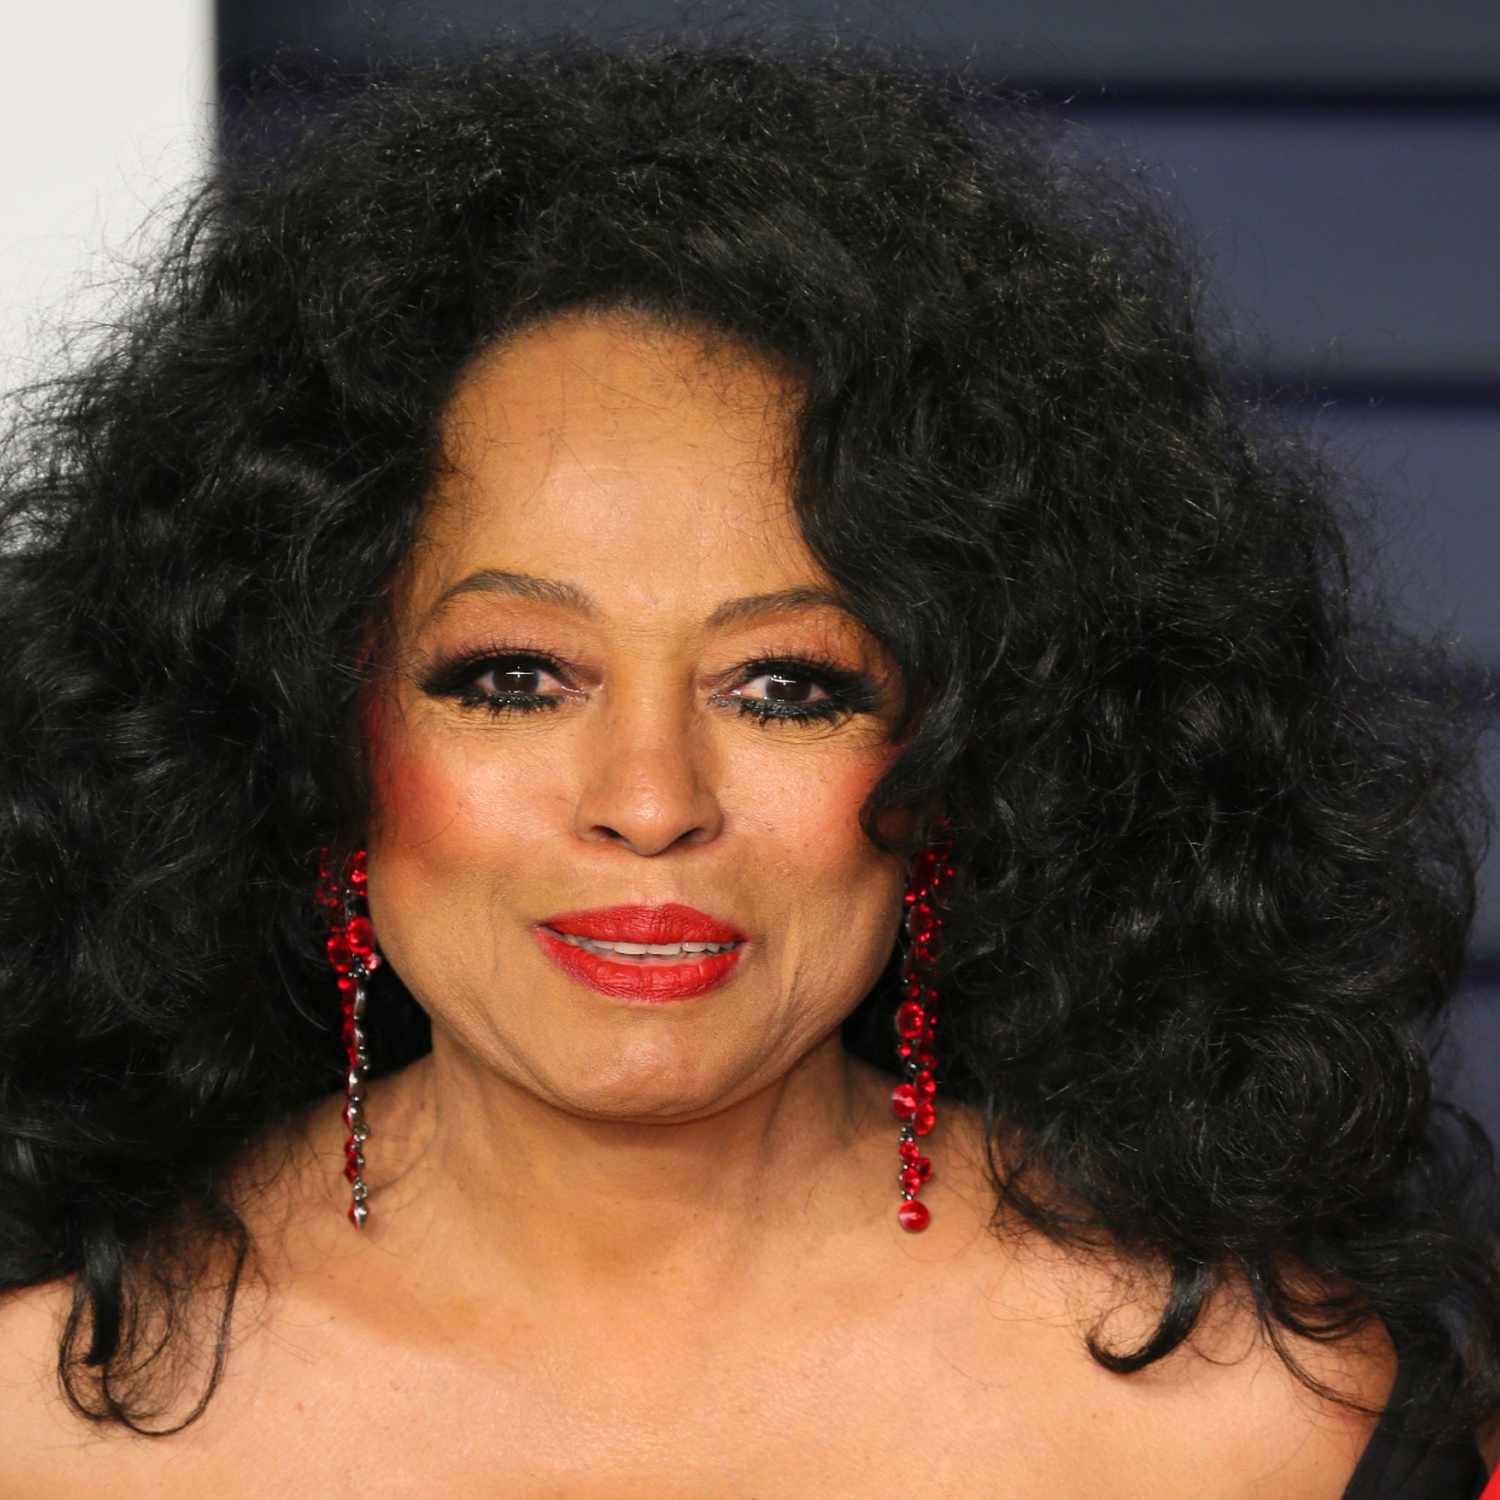 Diana Ross with her signature brushed-out curls